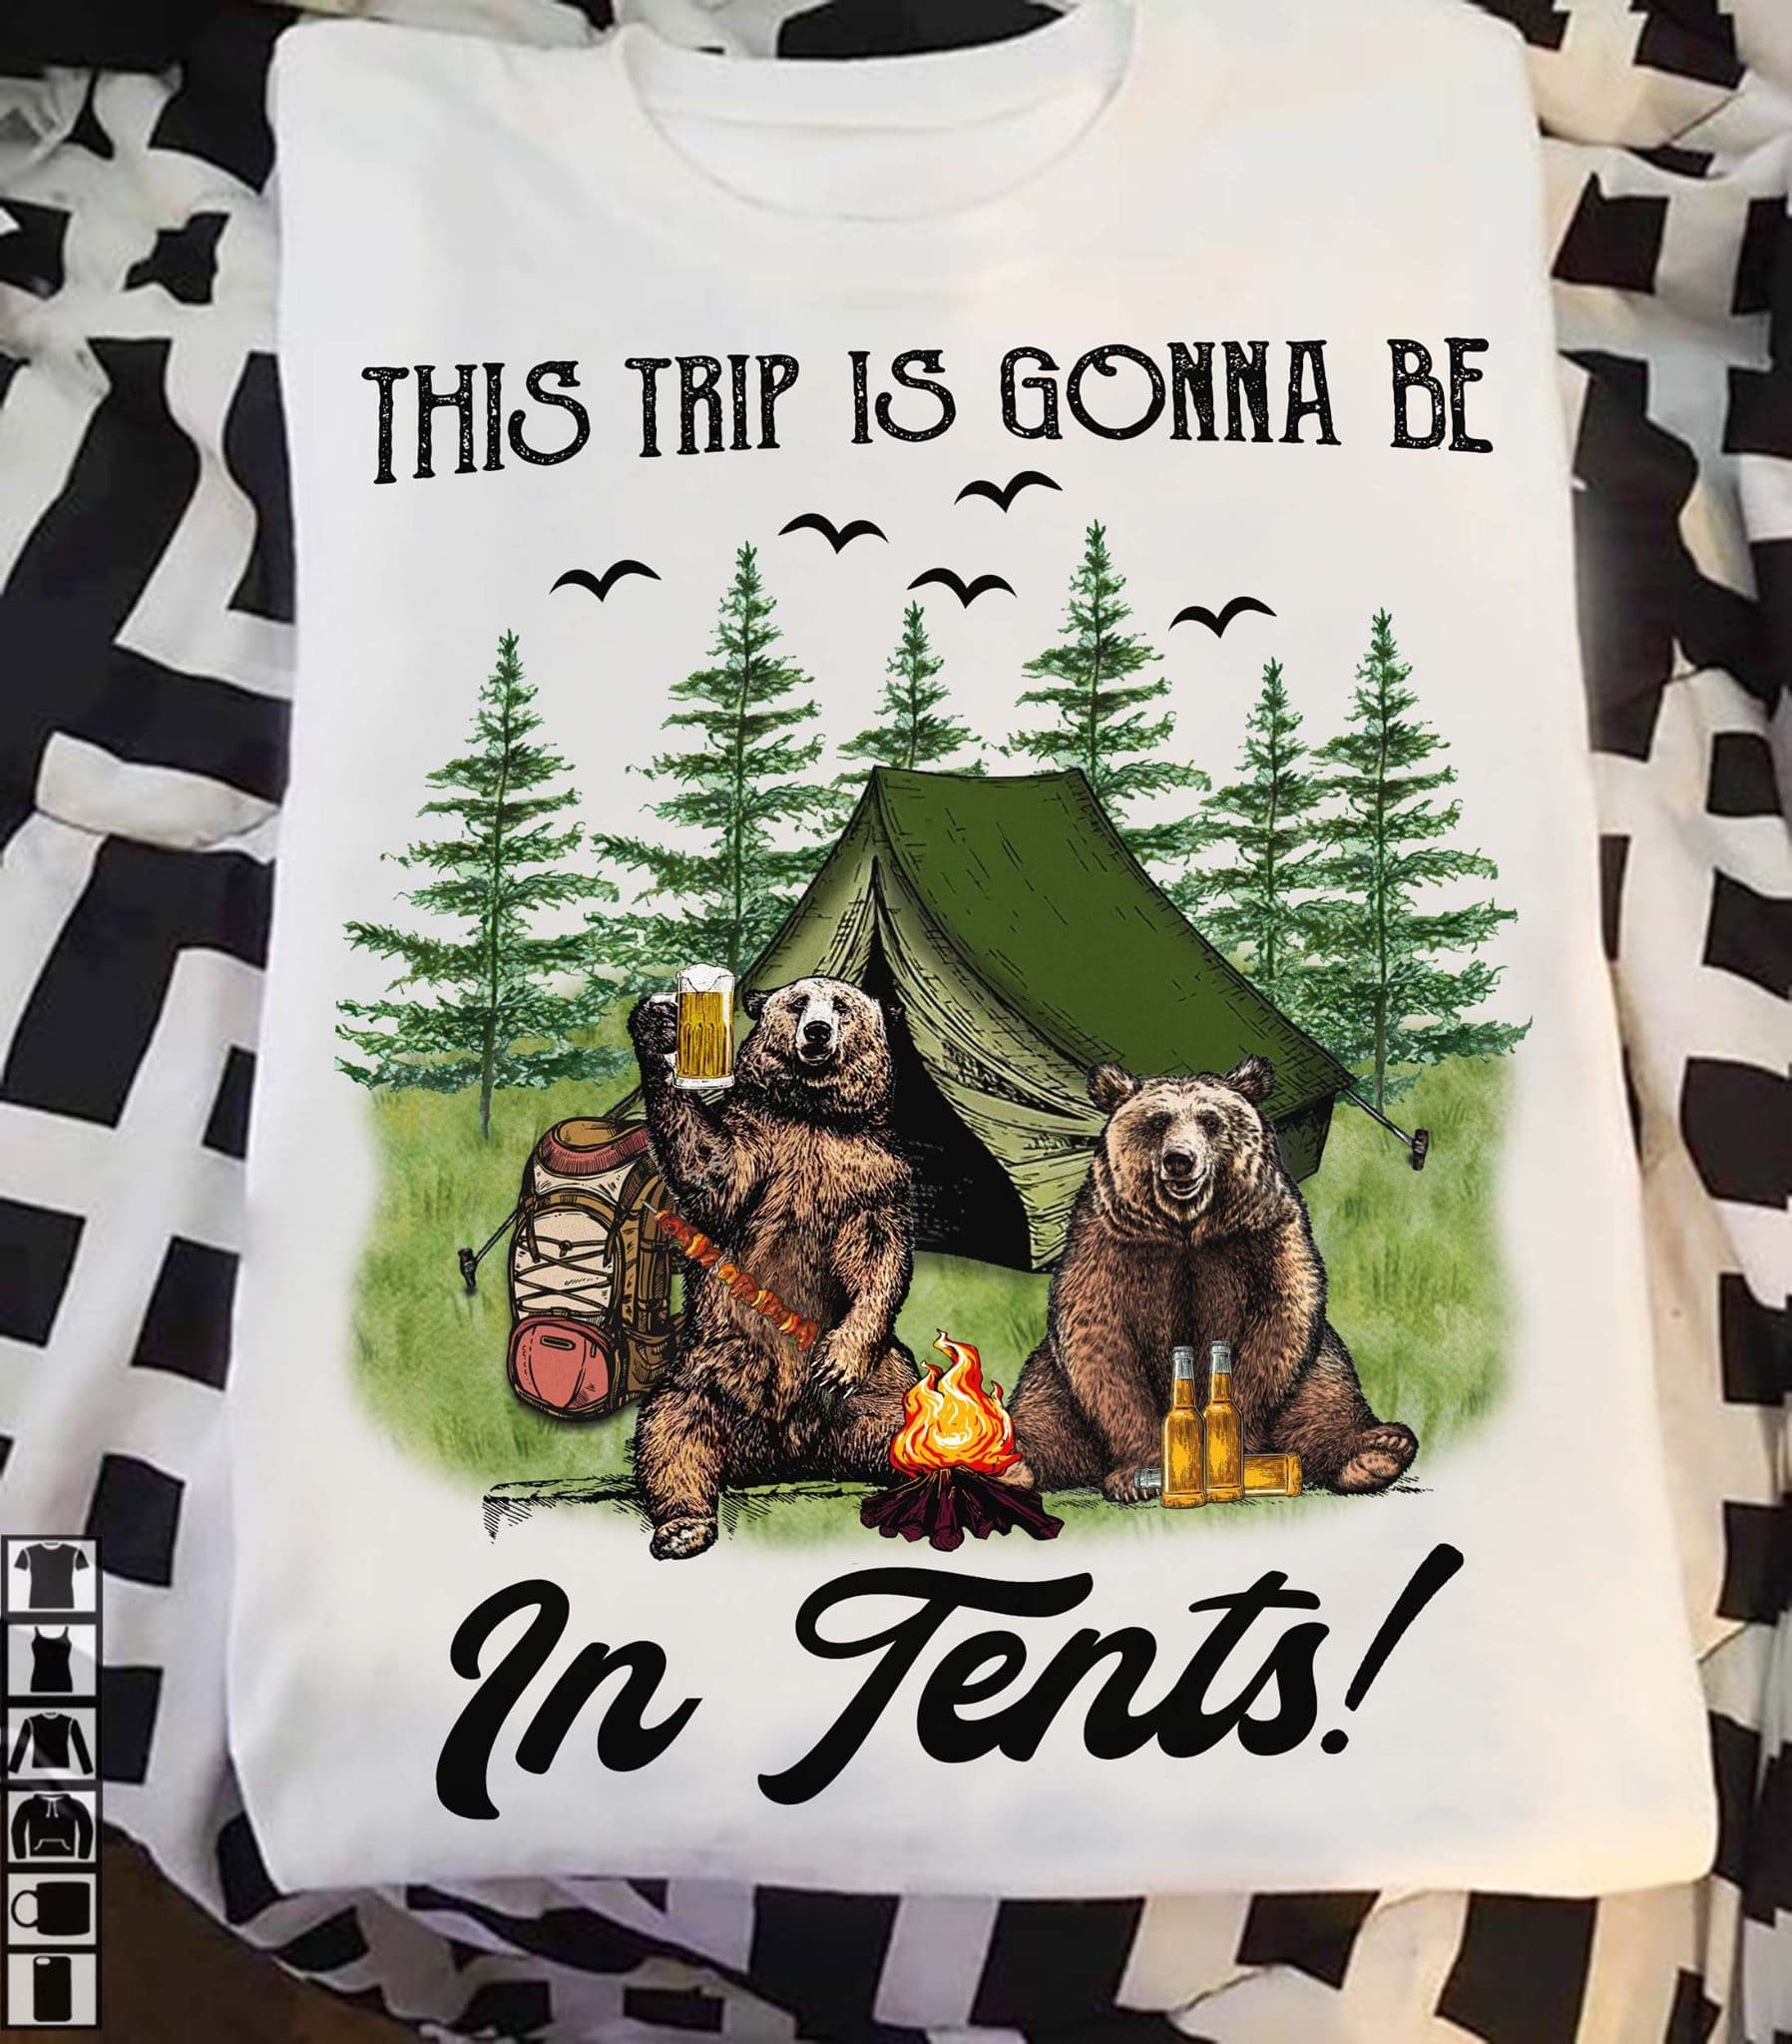 This trip is gonna be in tents - Bear go camping, drinking beer while camping